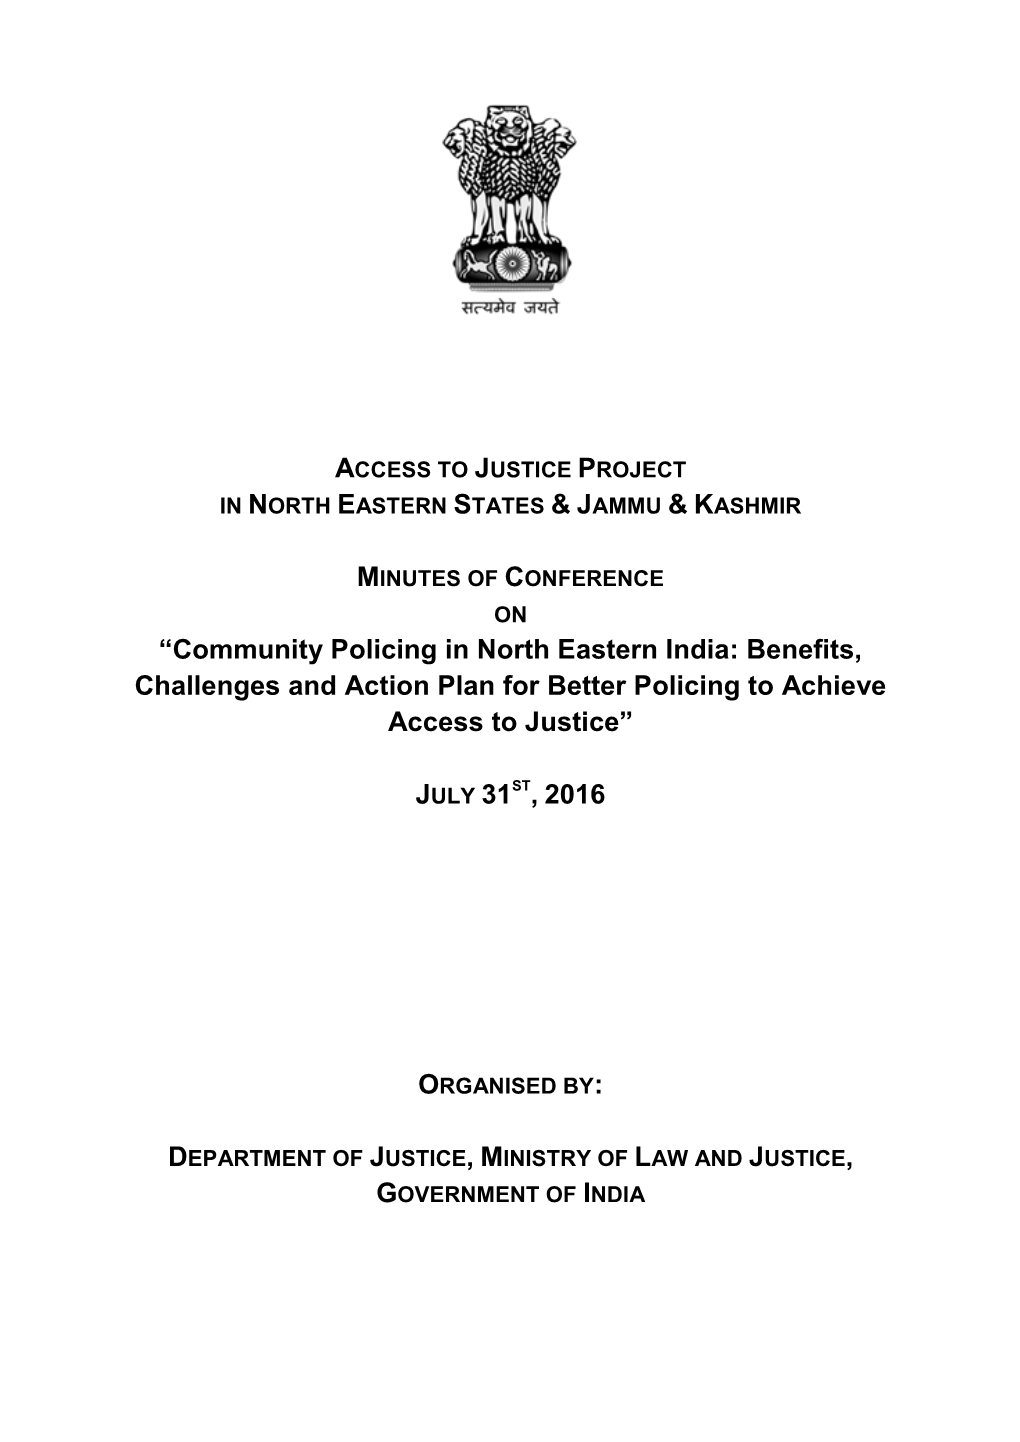 Community Policing in North Eastern India: Benefits, Challenges and Action Plan for Better Policing to Achieve Access to Justice”